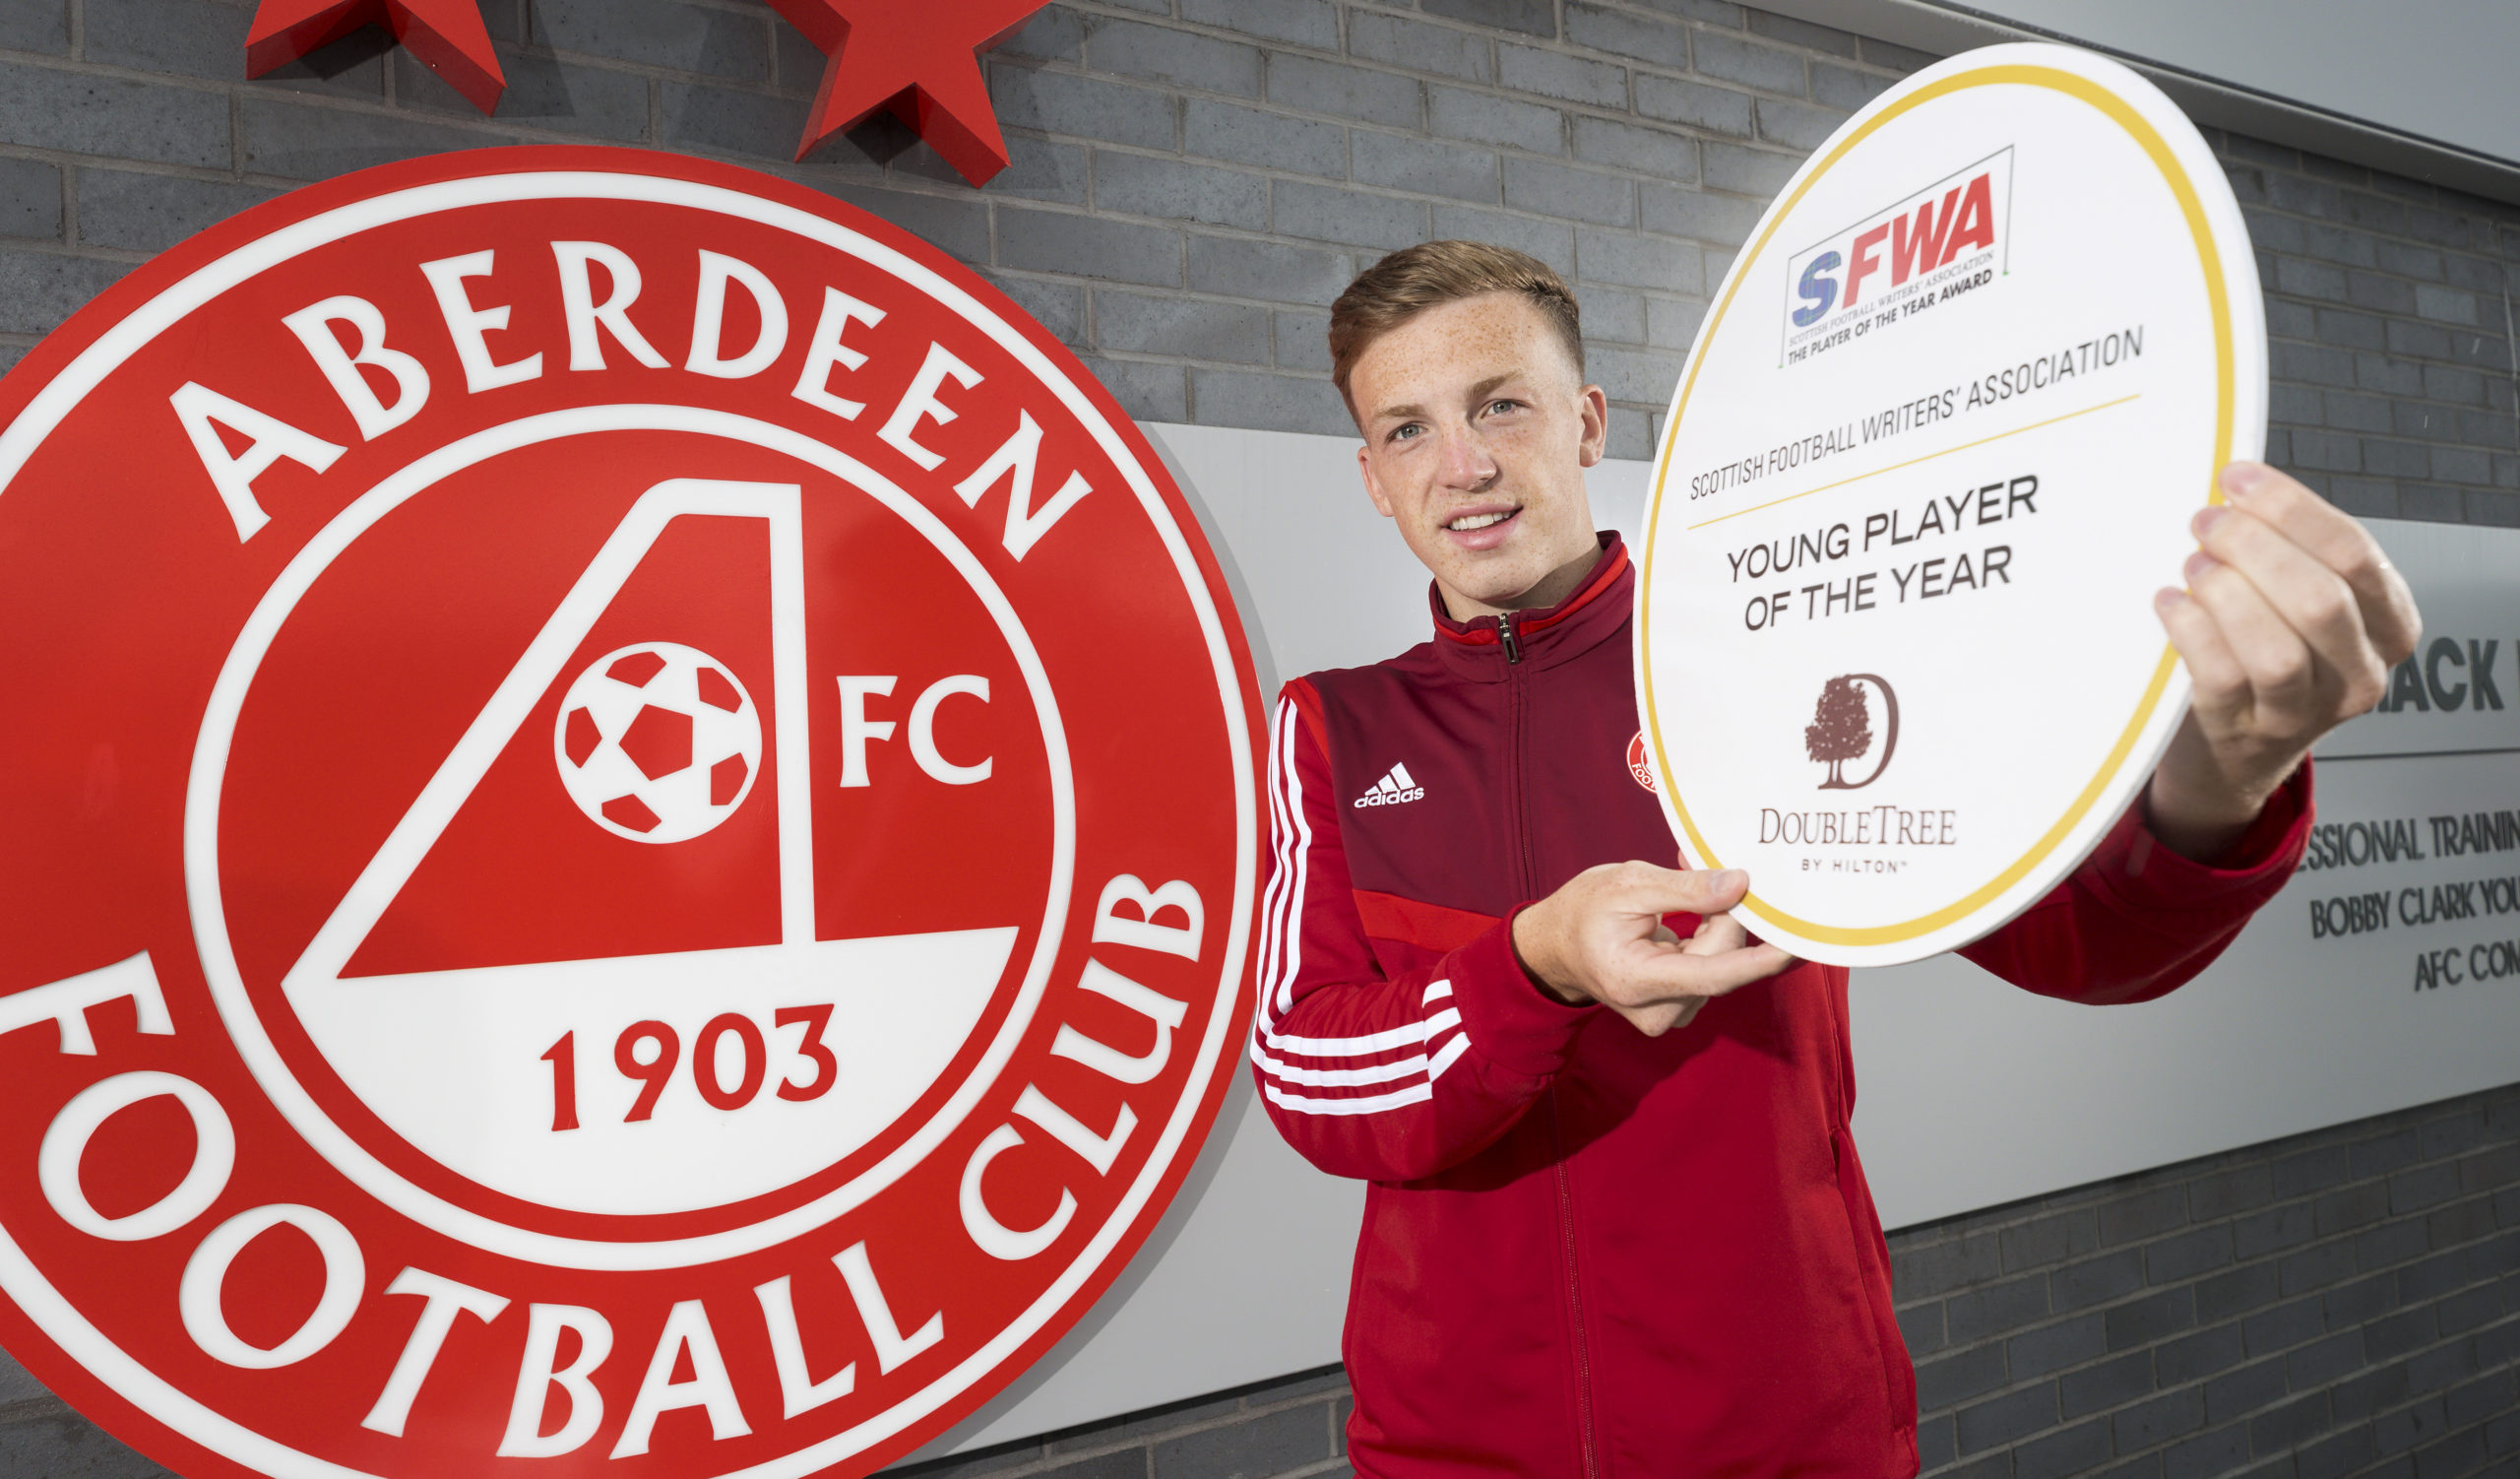 Lewis Ferguson of Aberdeen has been voted as Young  Player of the year by The Scottish Football Writers Association